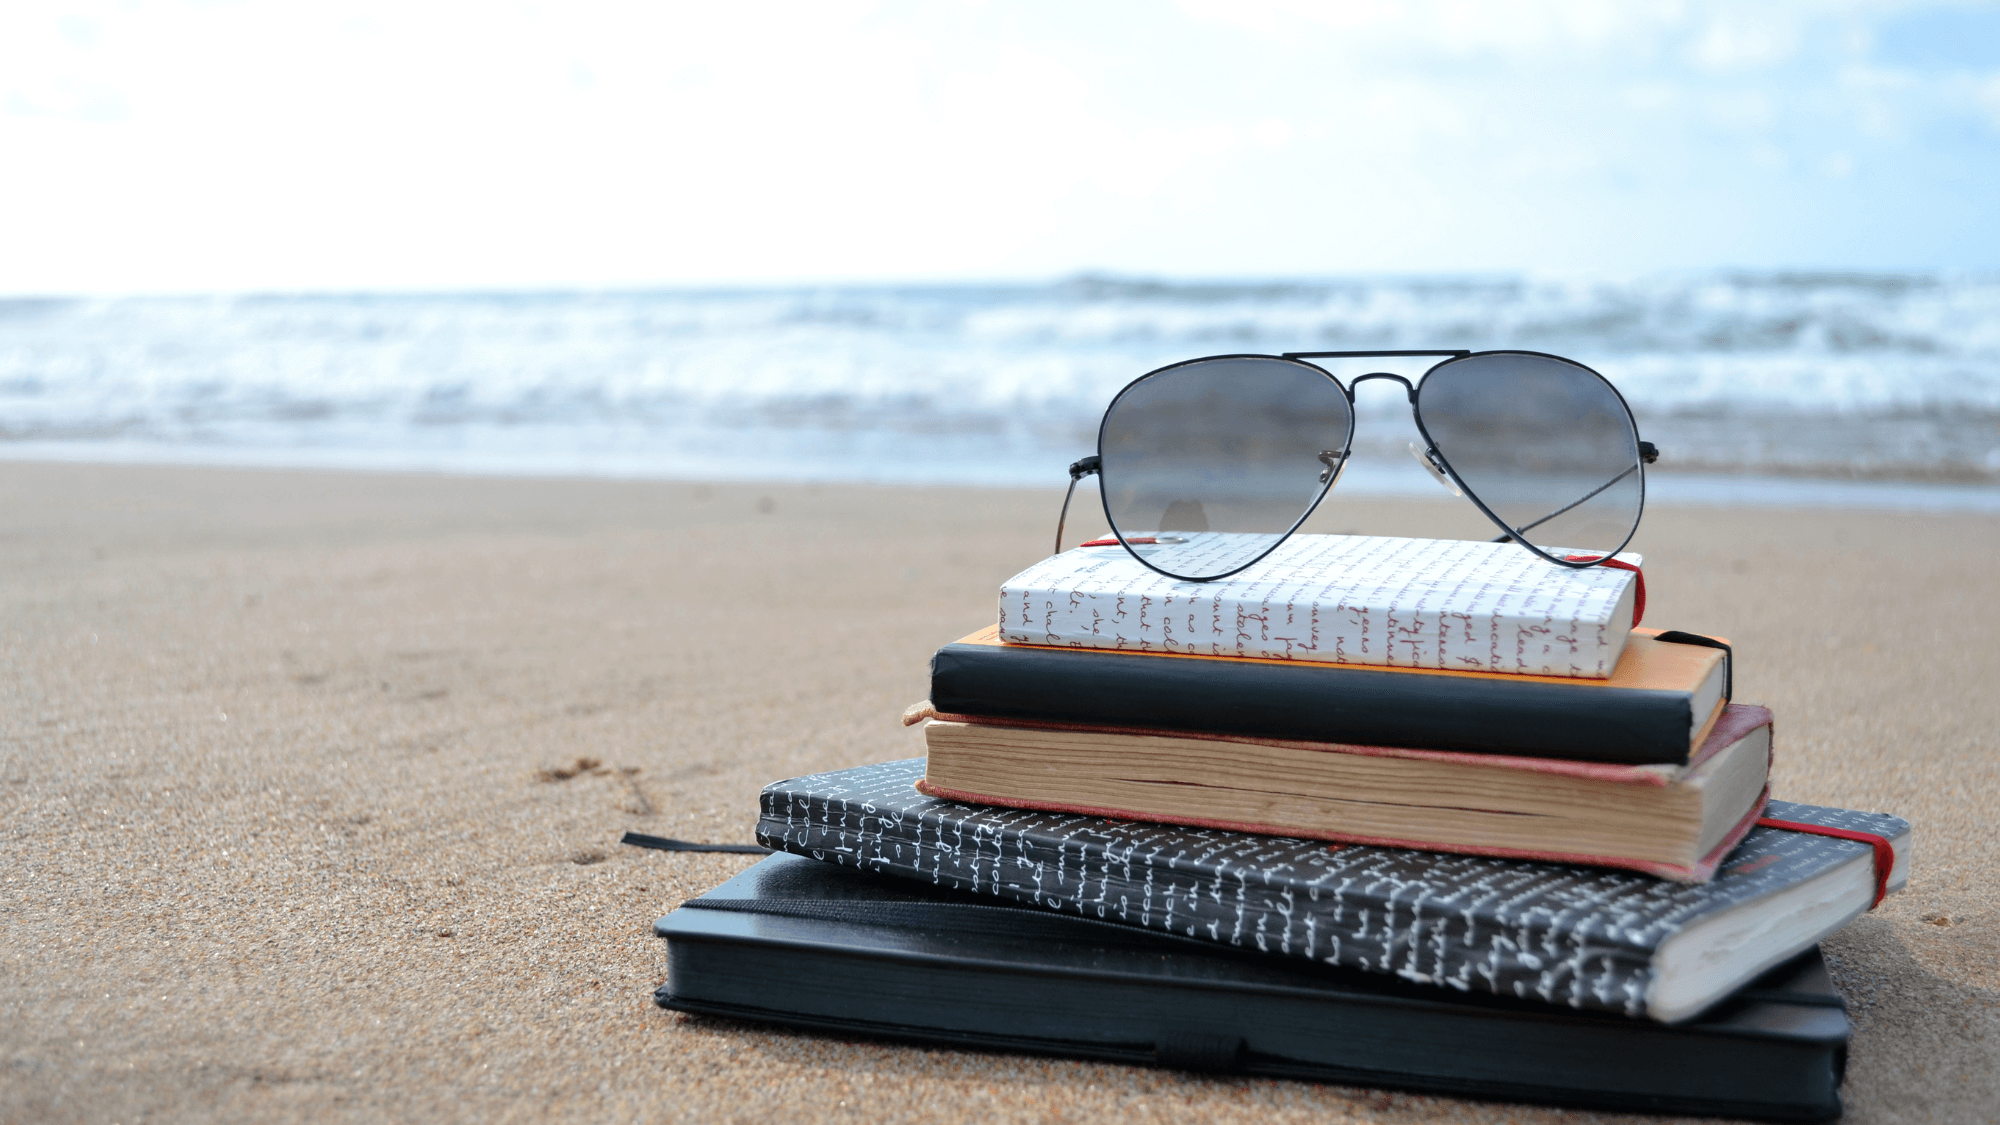 Sunglasses on a Pile of Books at the Beach